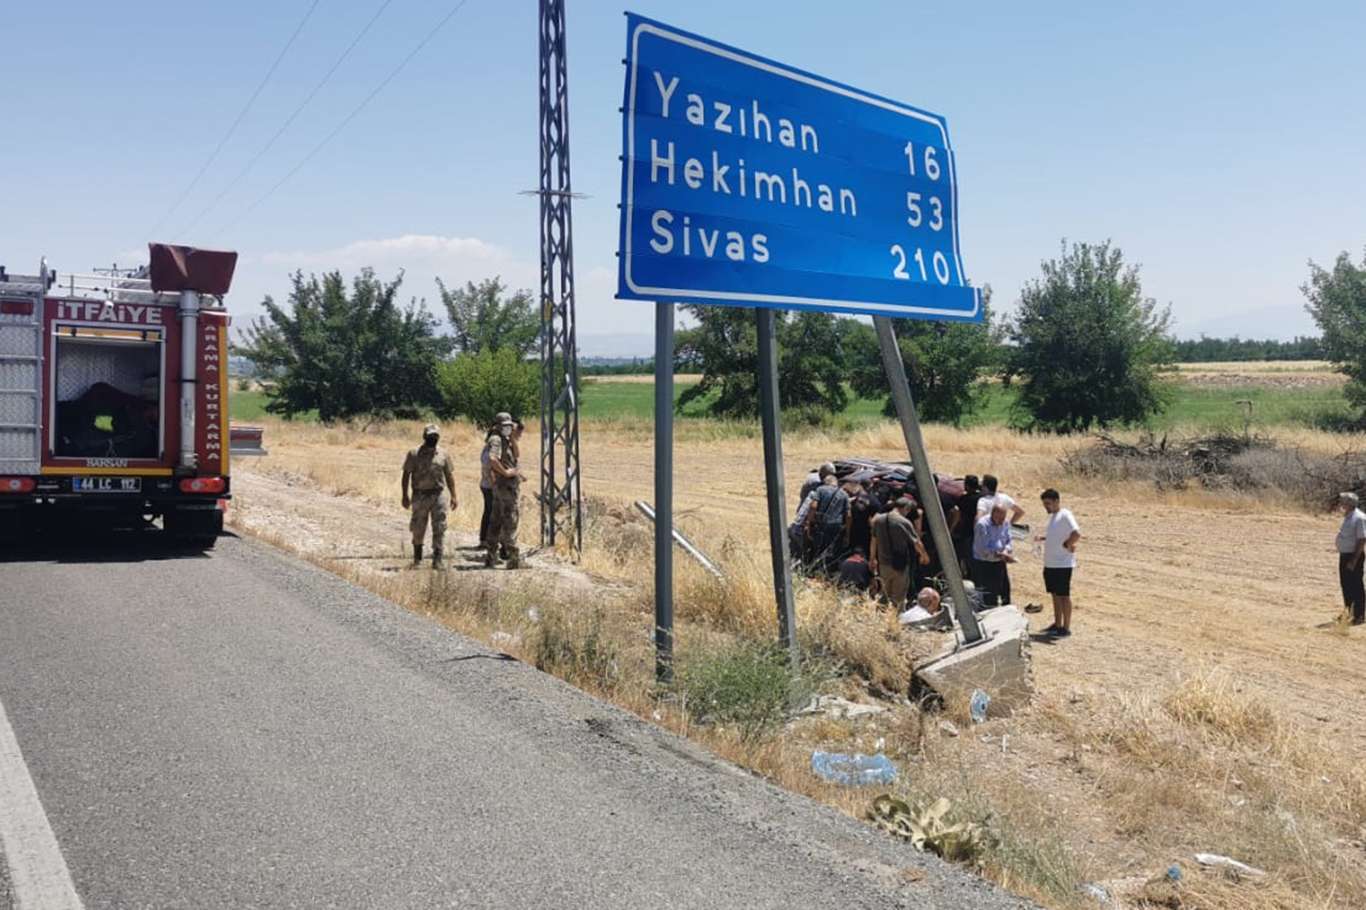 4 people injured in road accident in eastern Turkey